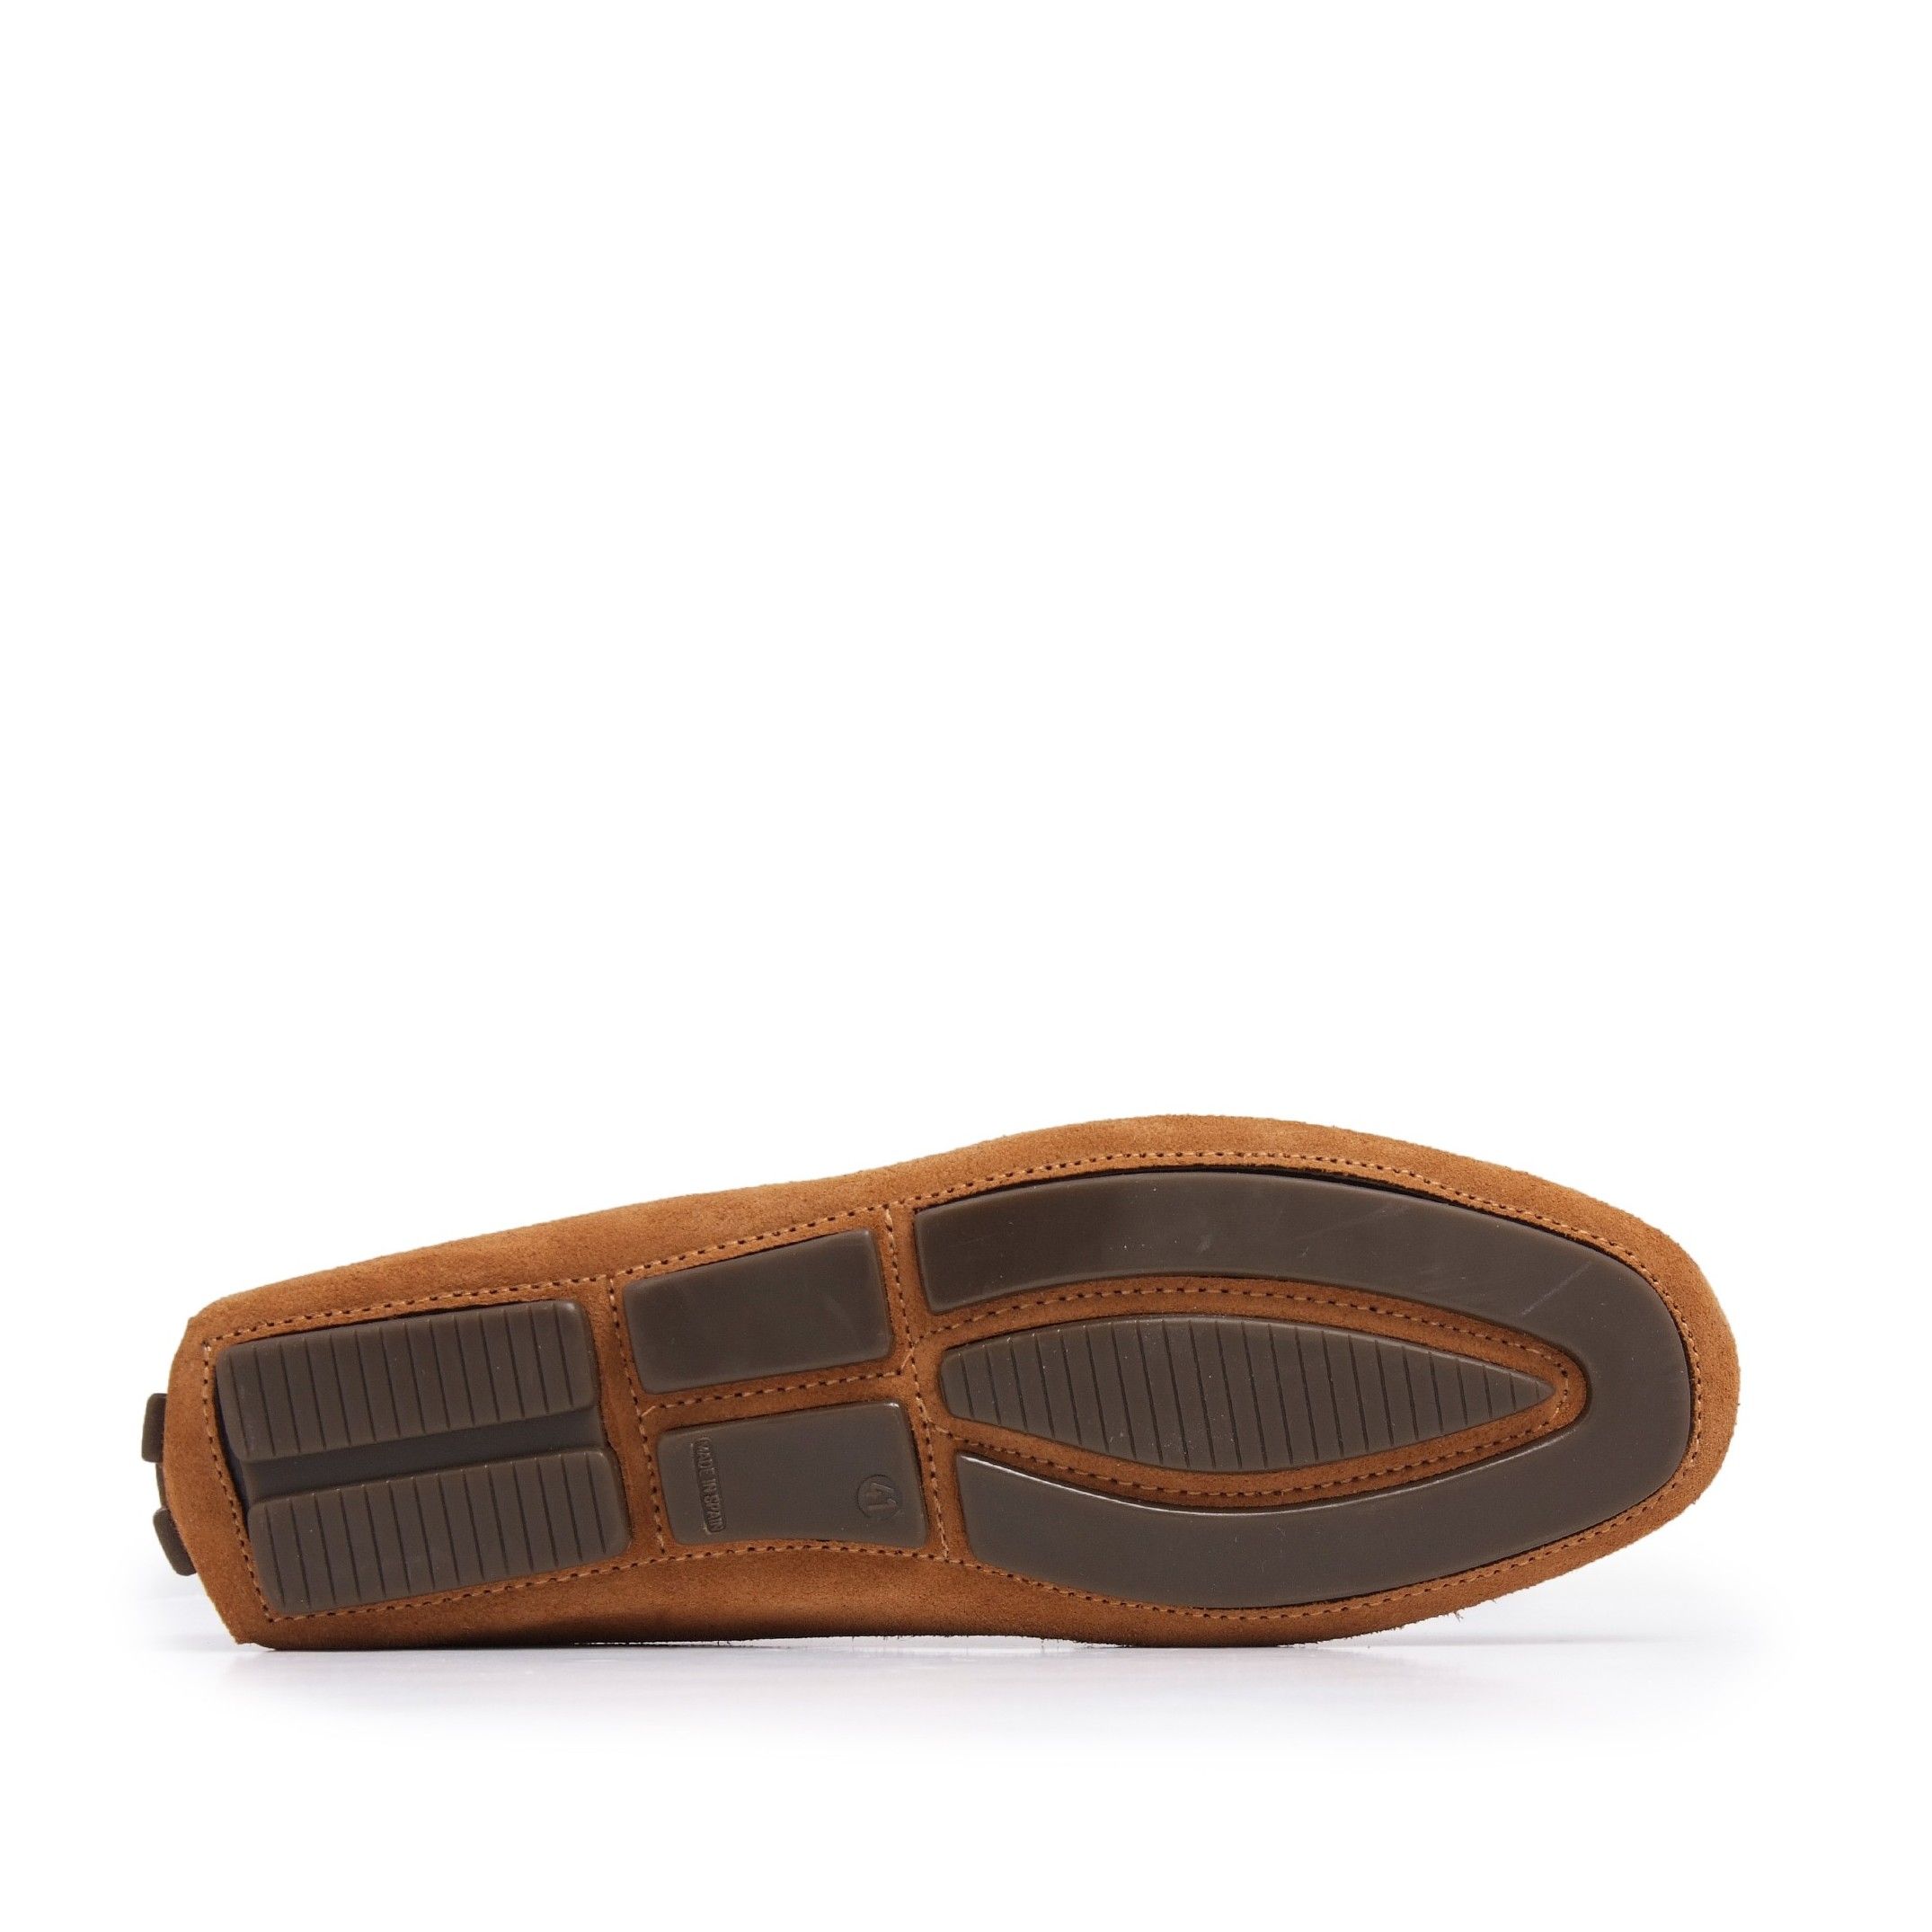 Split leather moccasins with two-color strip and stitched conductive sole. Upper made of split leather. Inner made of leather. Insole made of leather. Sole made of Polyurethane. This product is manufactured in Spain.